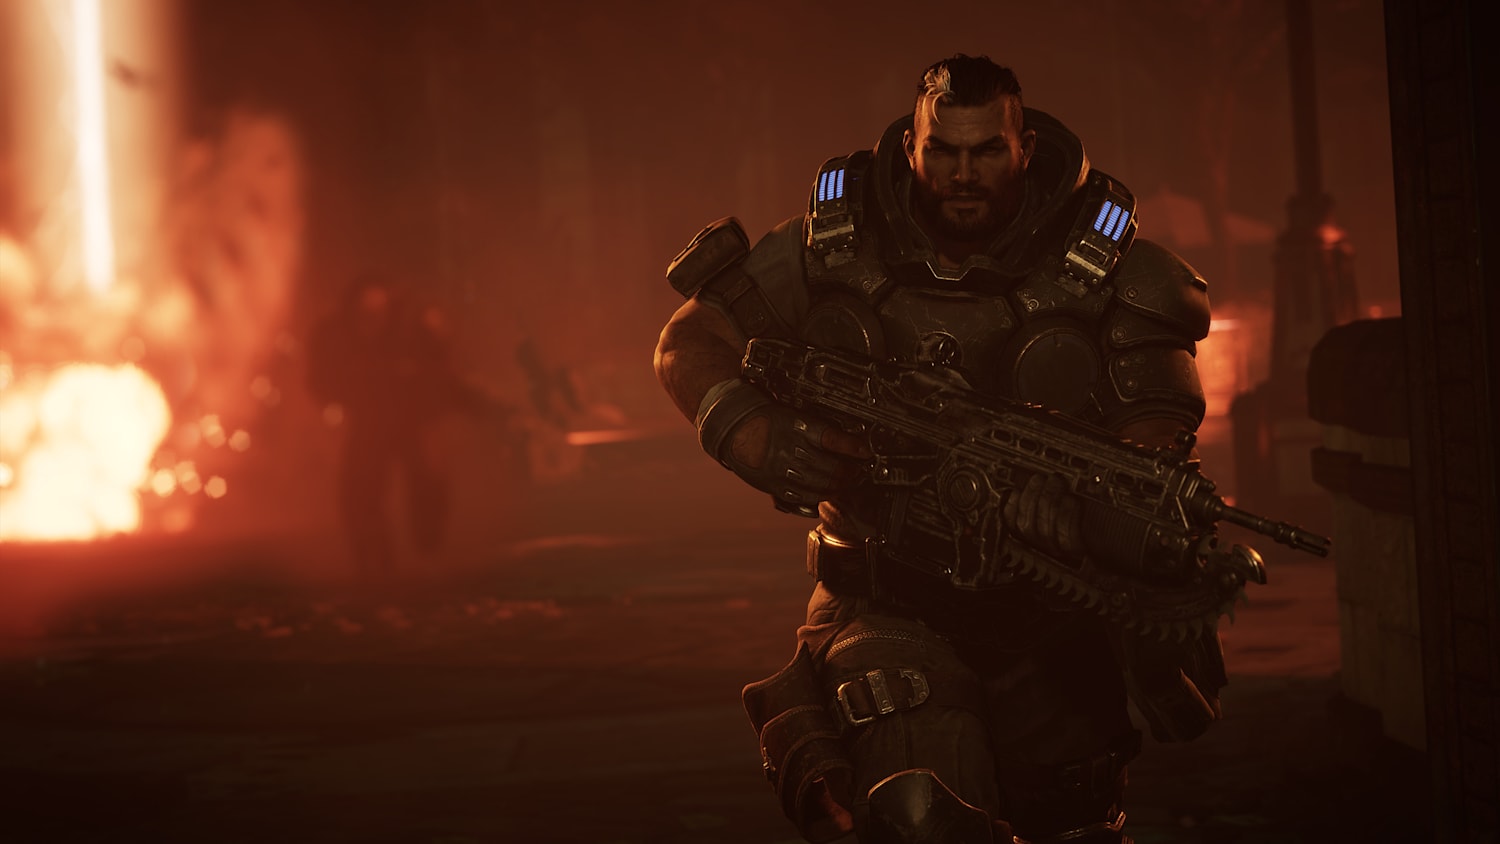 Gears Tactics tips: Top 6 for mastering encounters